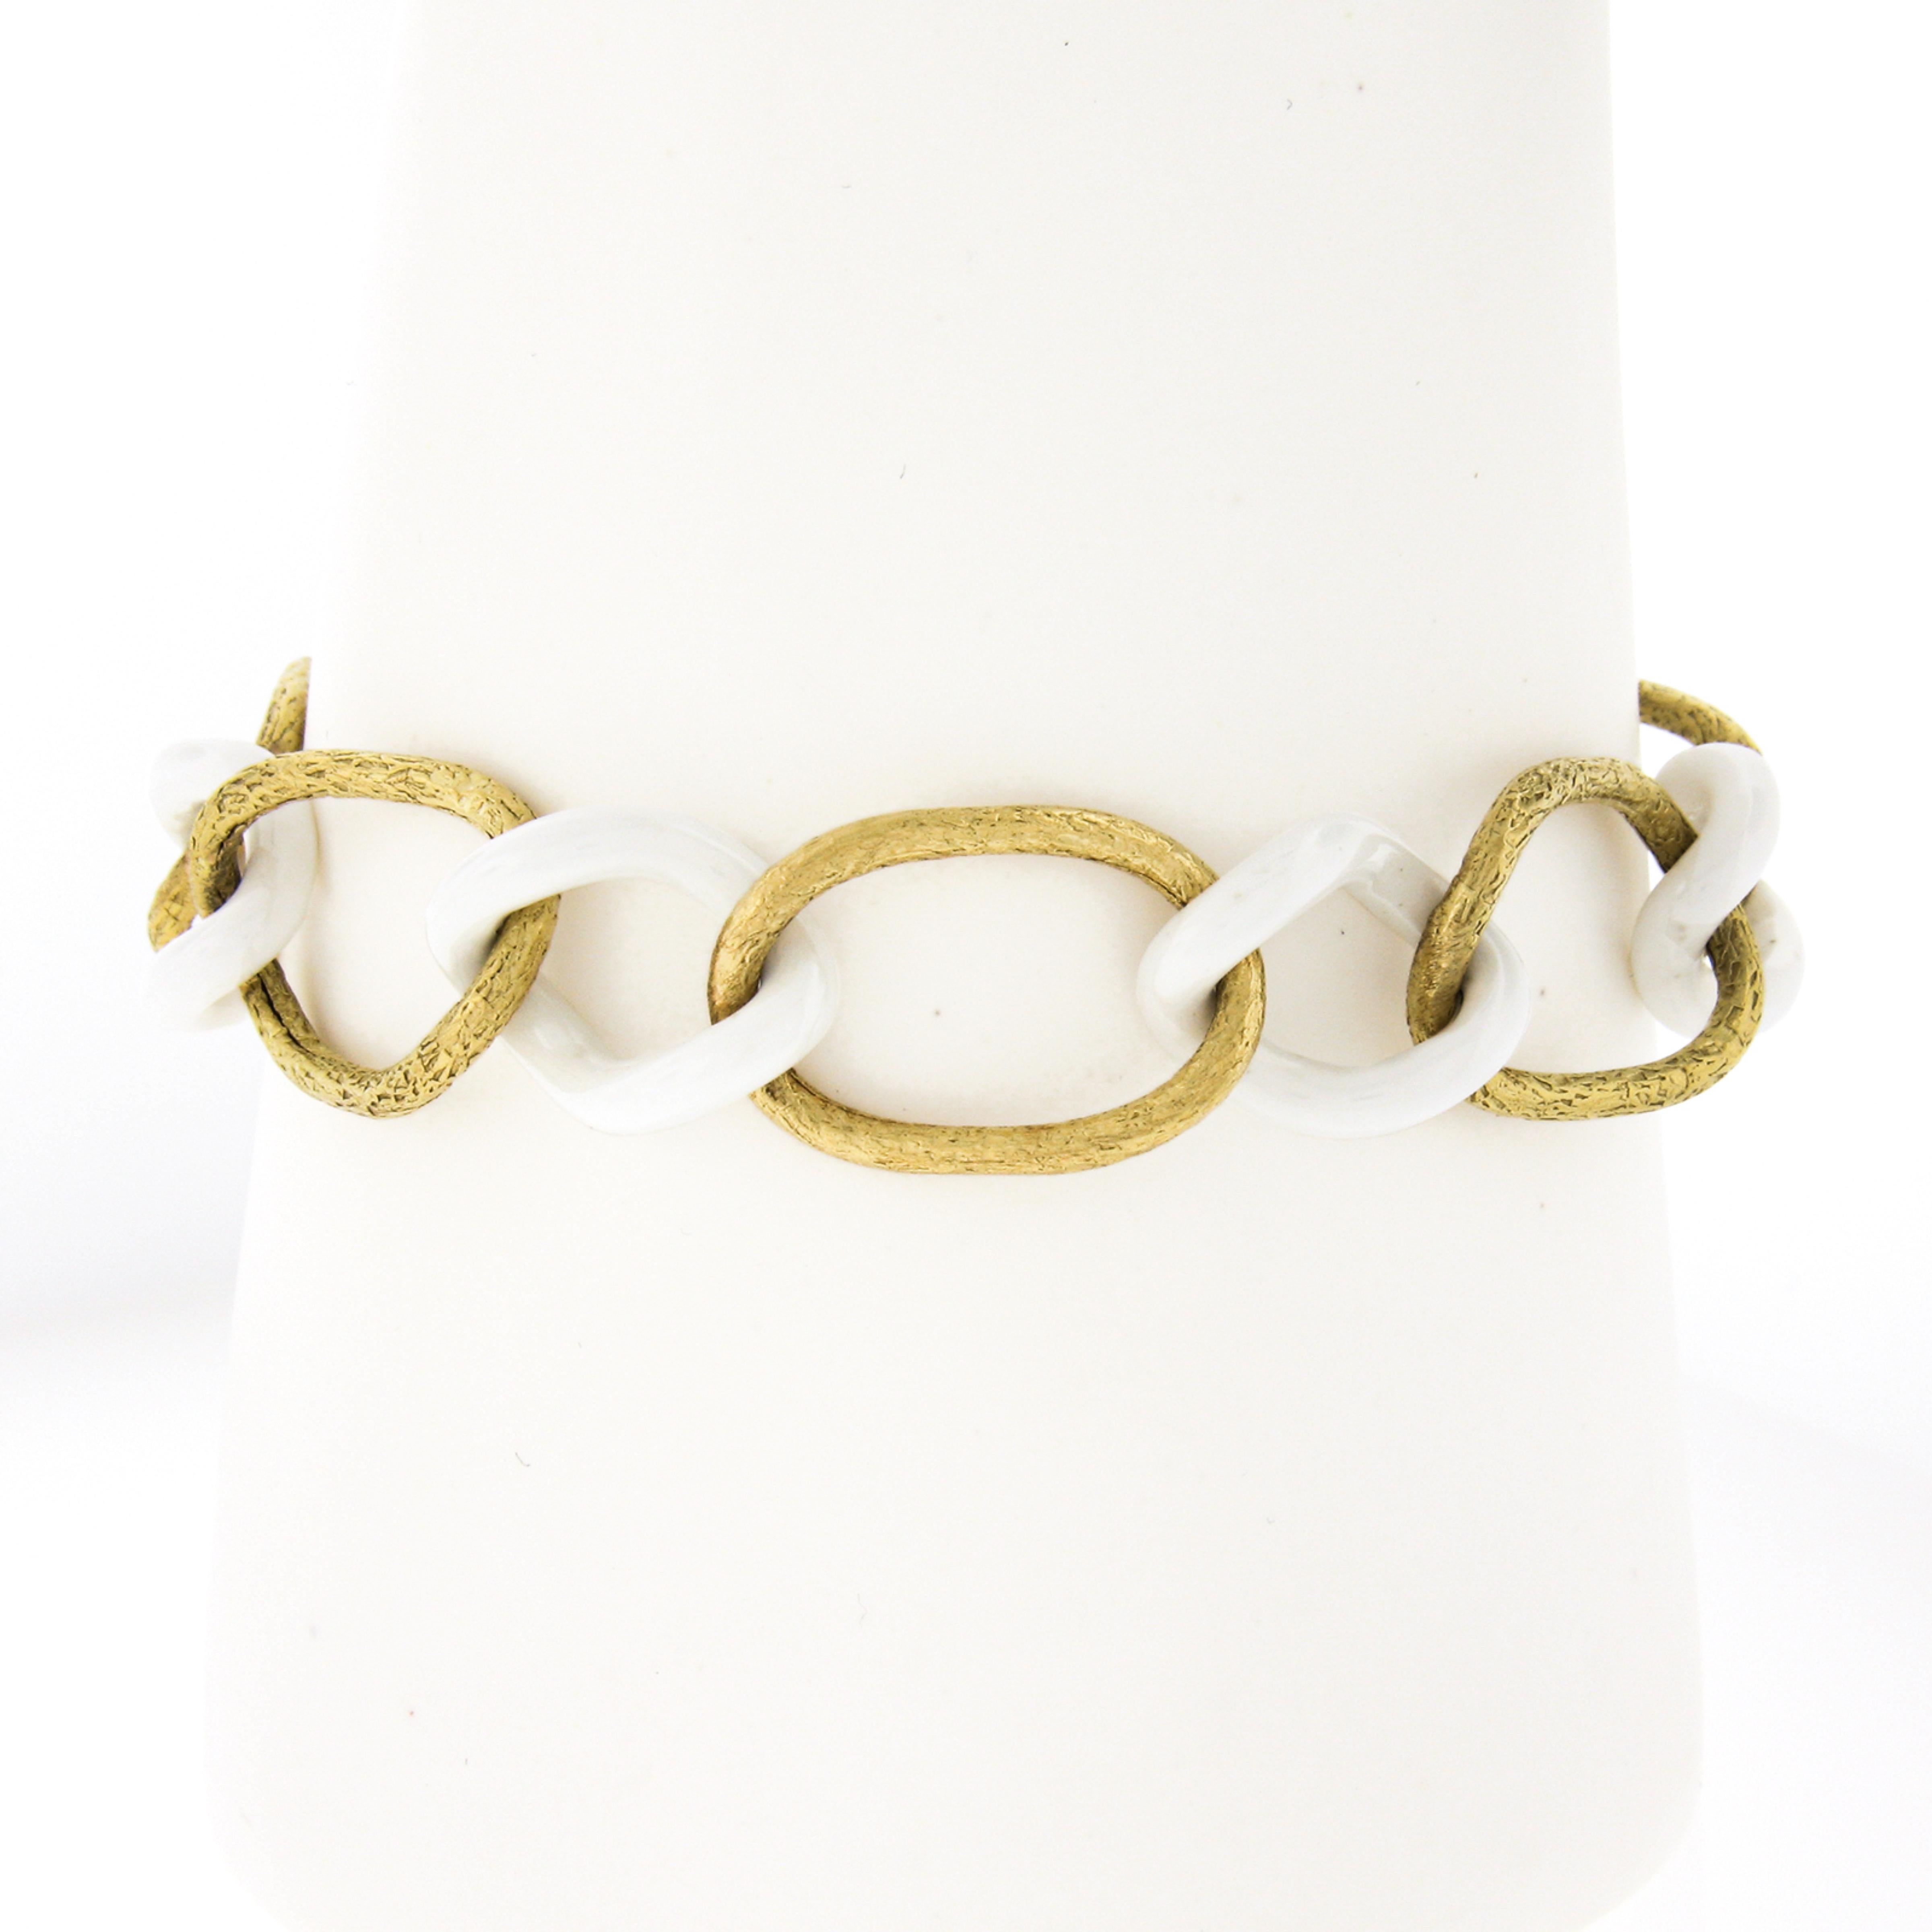 This uniquely and elegantly designed chain link bracelet by Giovanni Marchisio features both, solid 18k yellow gold and white ceramic links that alternate throughout. The oval gold links have an amazing textured finish that looks similar to hammer